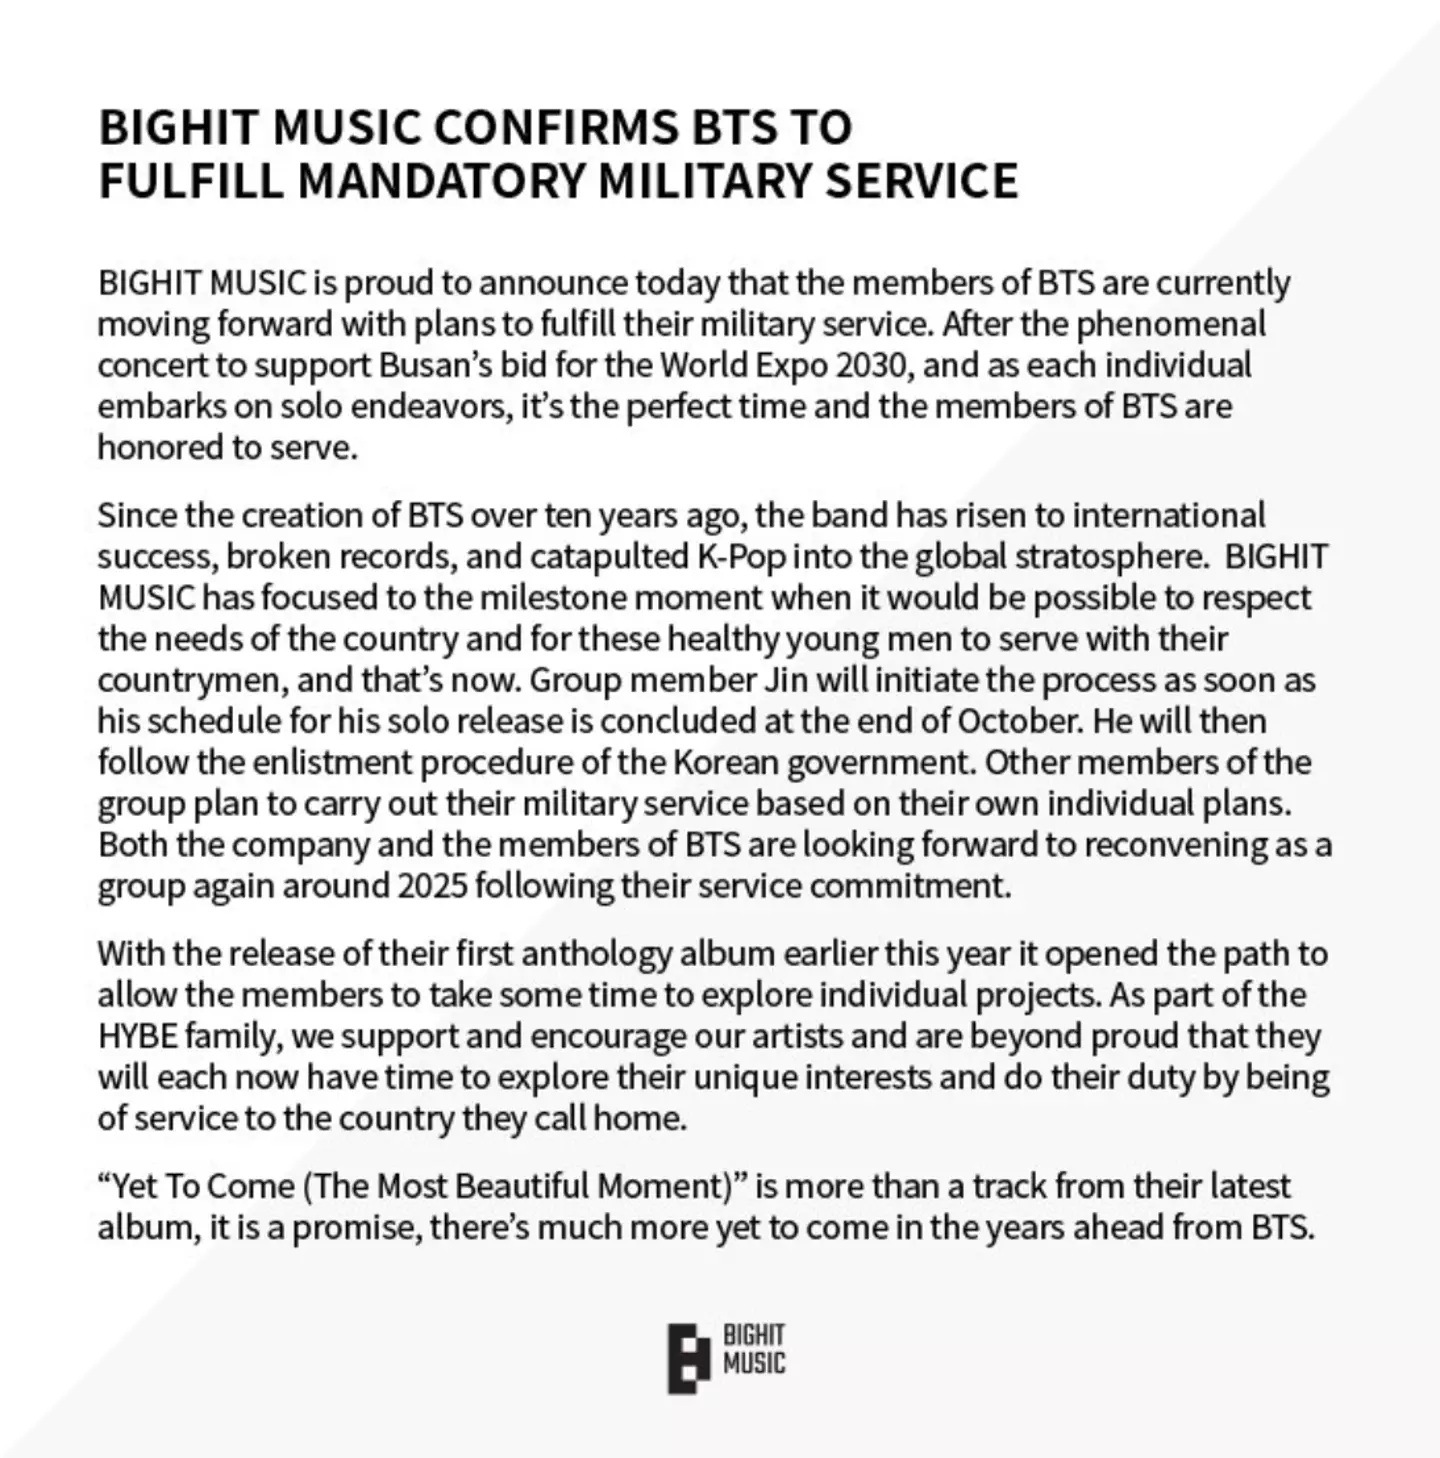 BTS’s record label BIGHIT MUSIC confirmed the stars would be conscripted into the military.